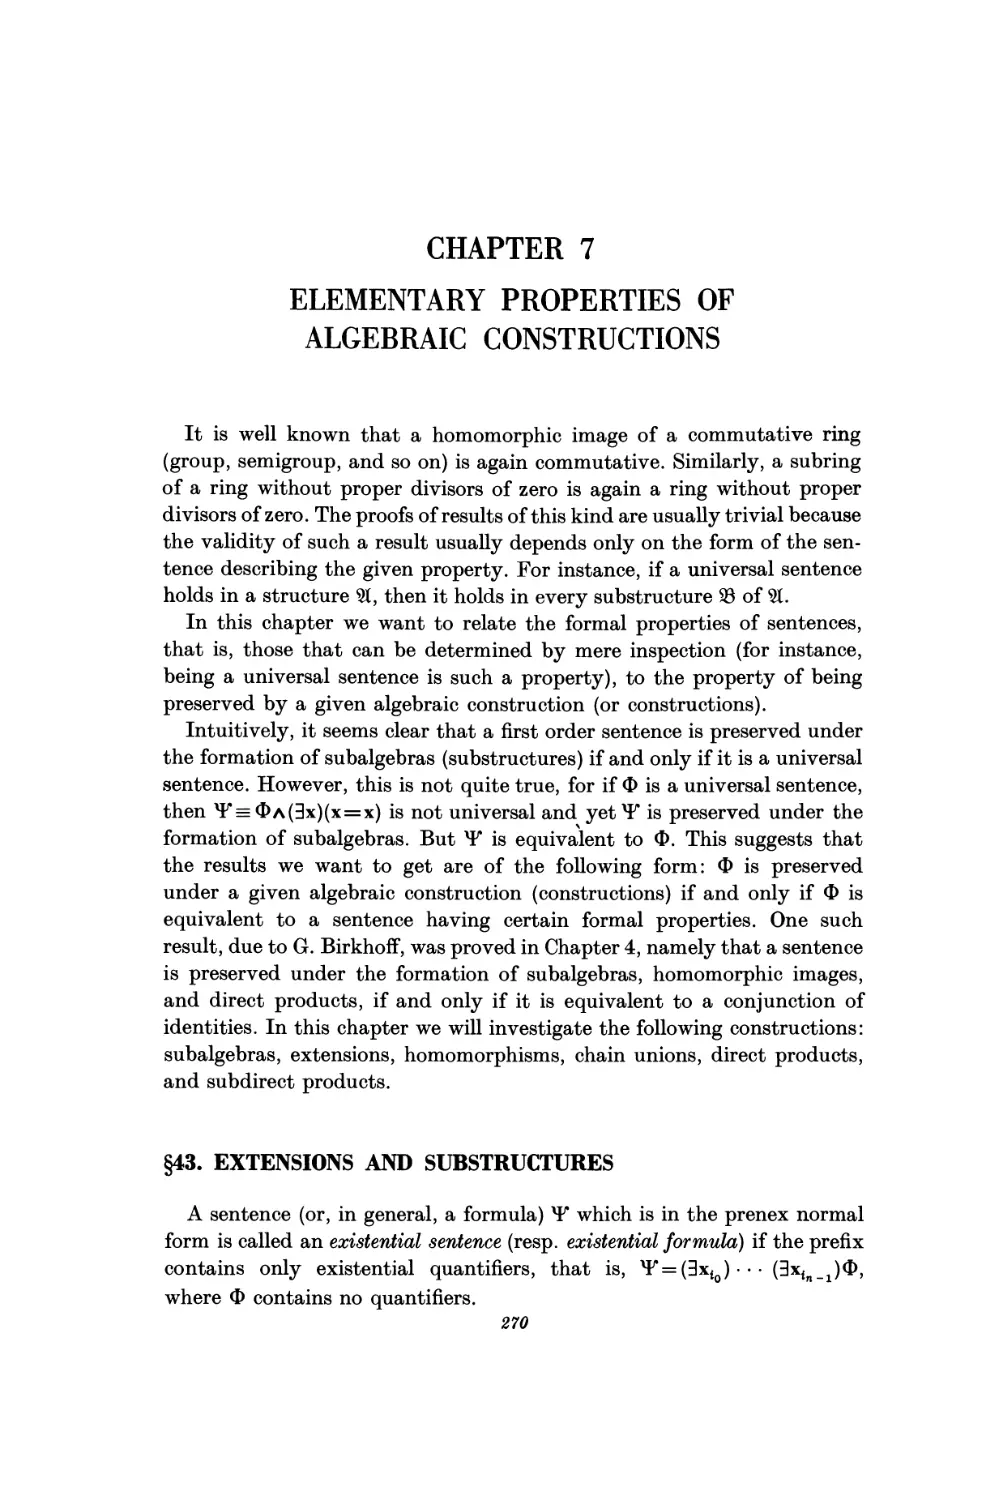 Chapter 7. Elementary Properties of Algebraic Constructions